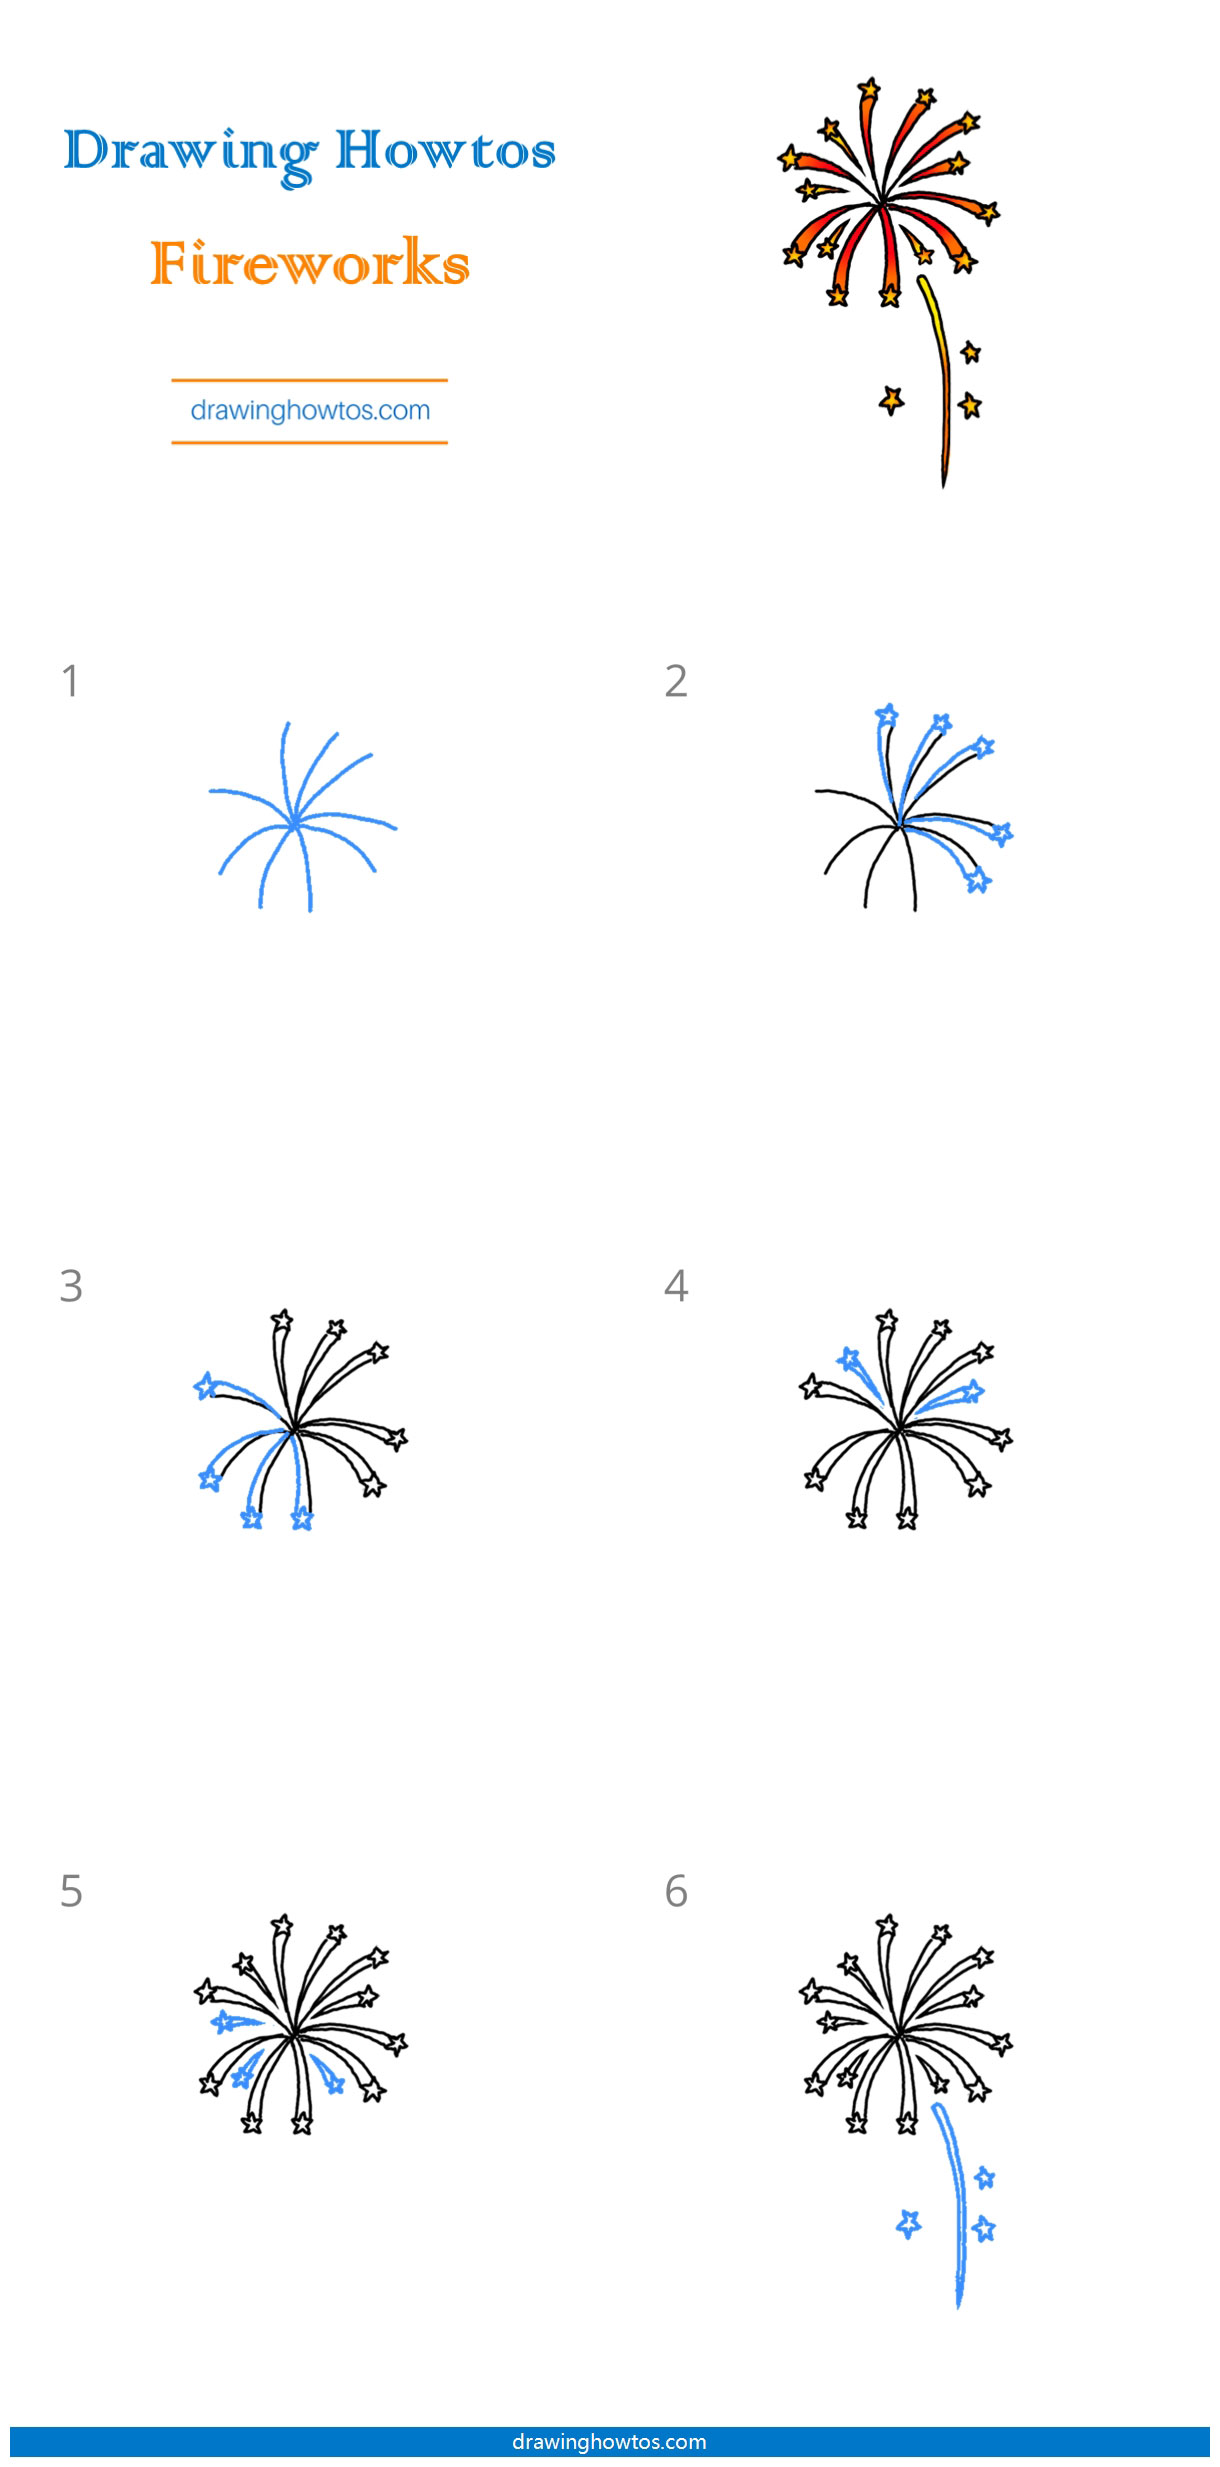 How to Draw Fireworks Step by Step Easy Drawing Guides Drawing Howtos